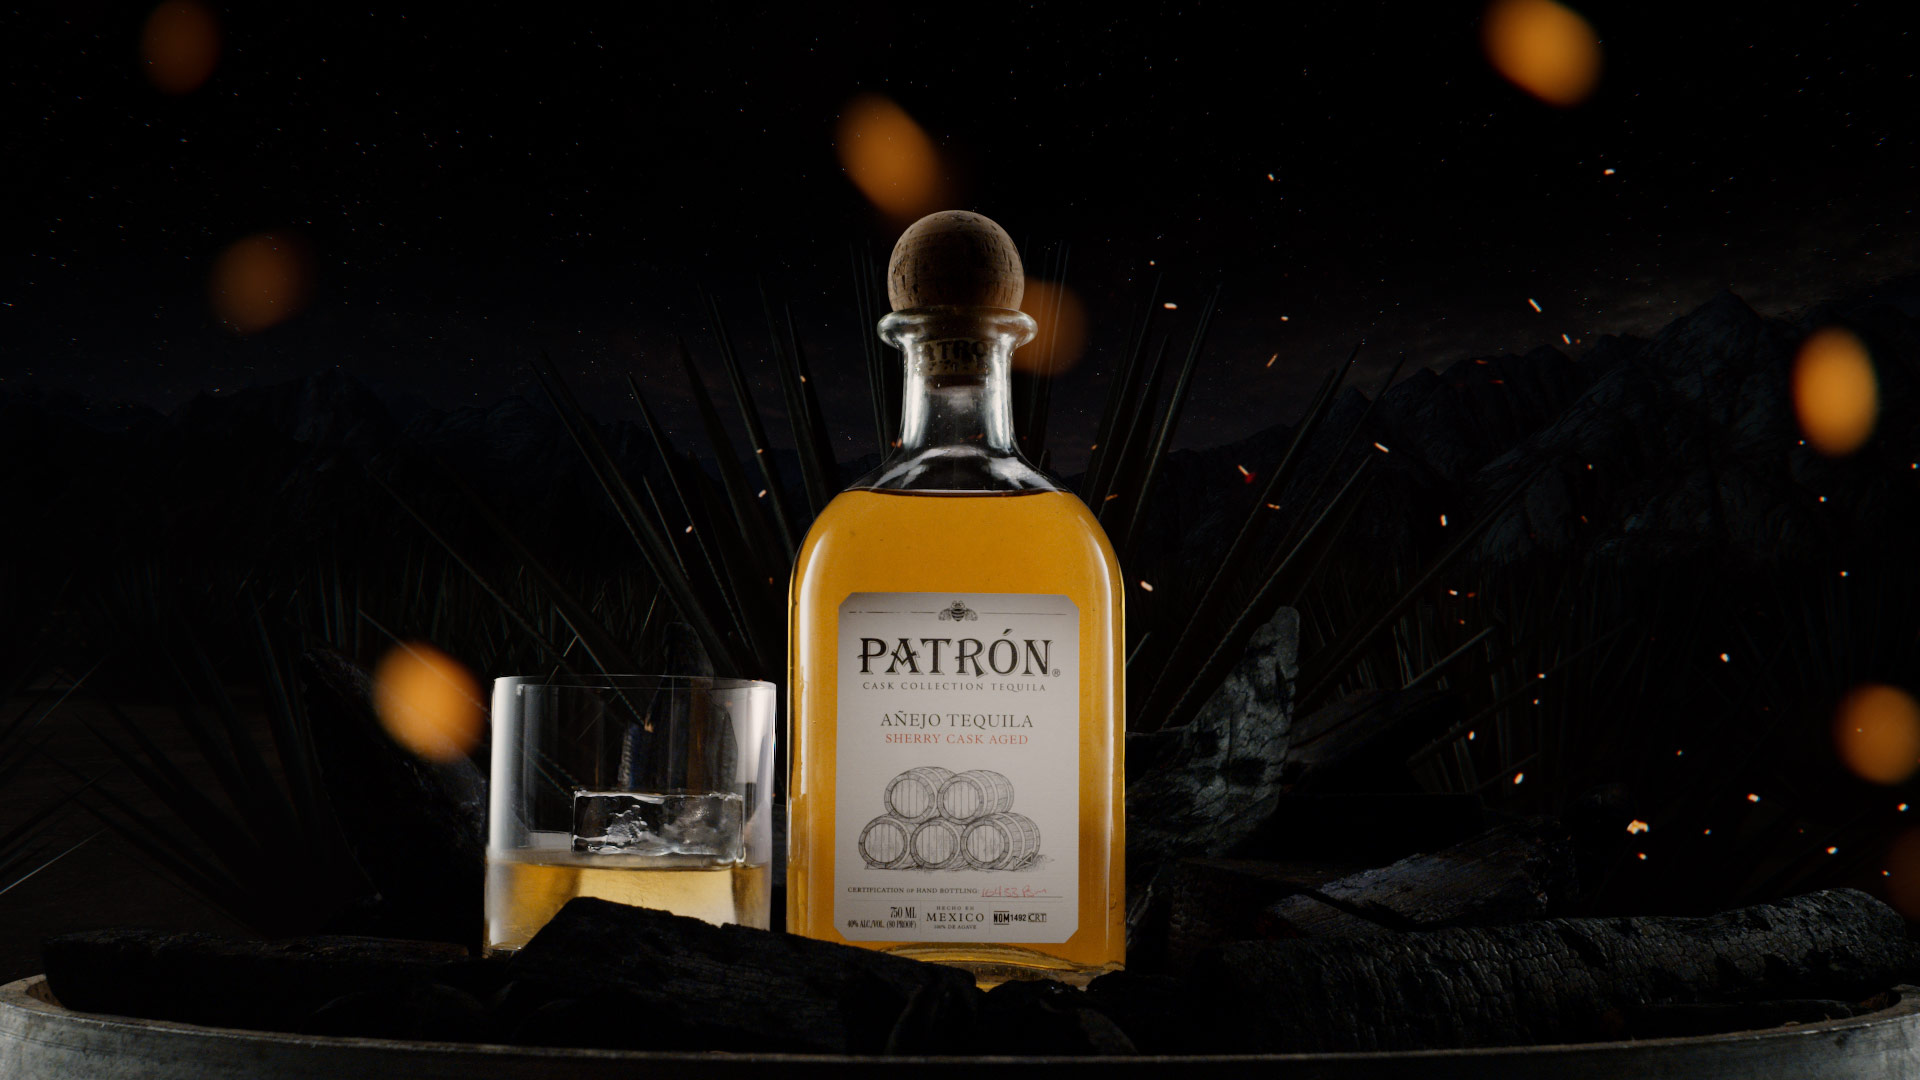 A Patron bottle sits on a barel with a glass of tequila next to it. Embers float past the camera.